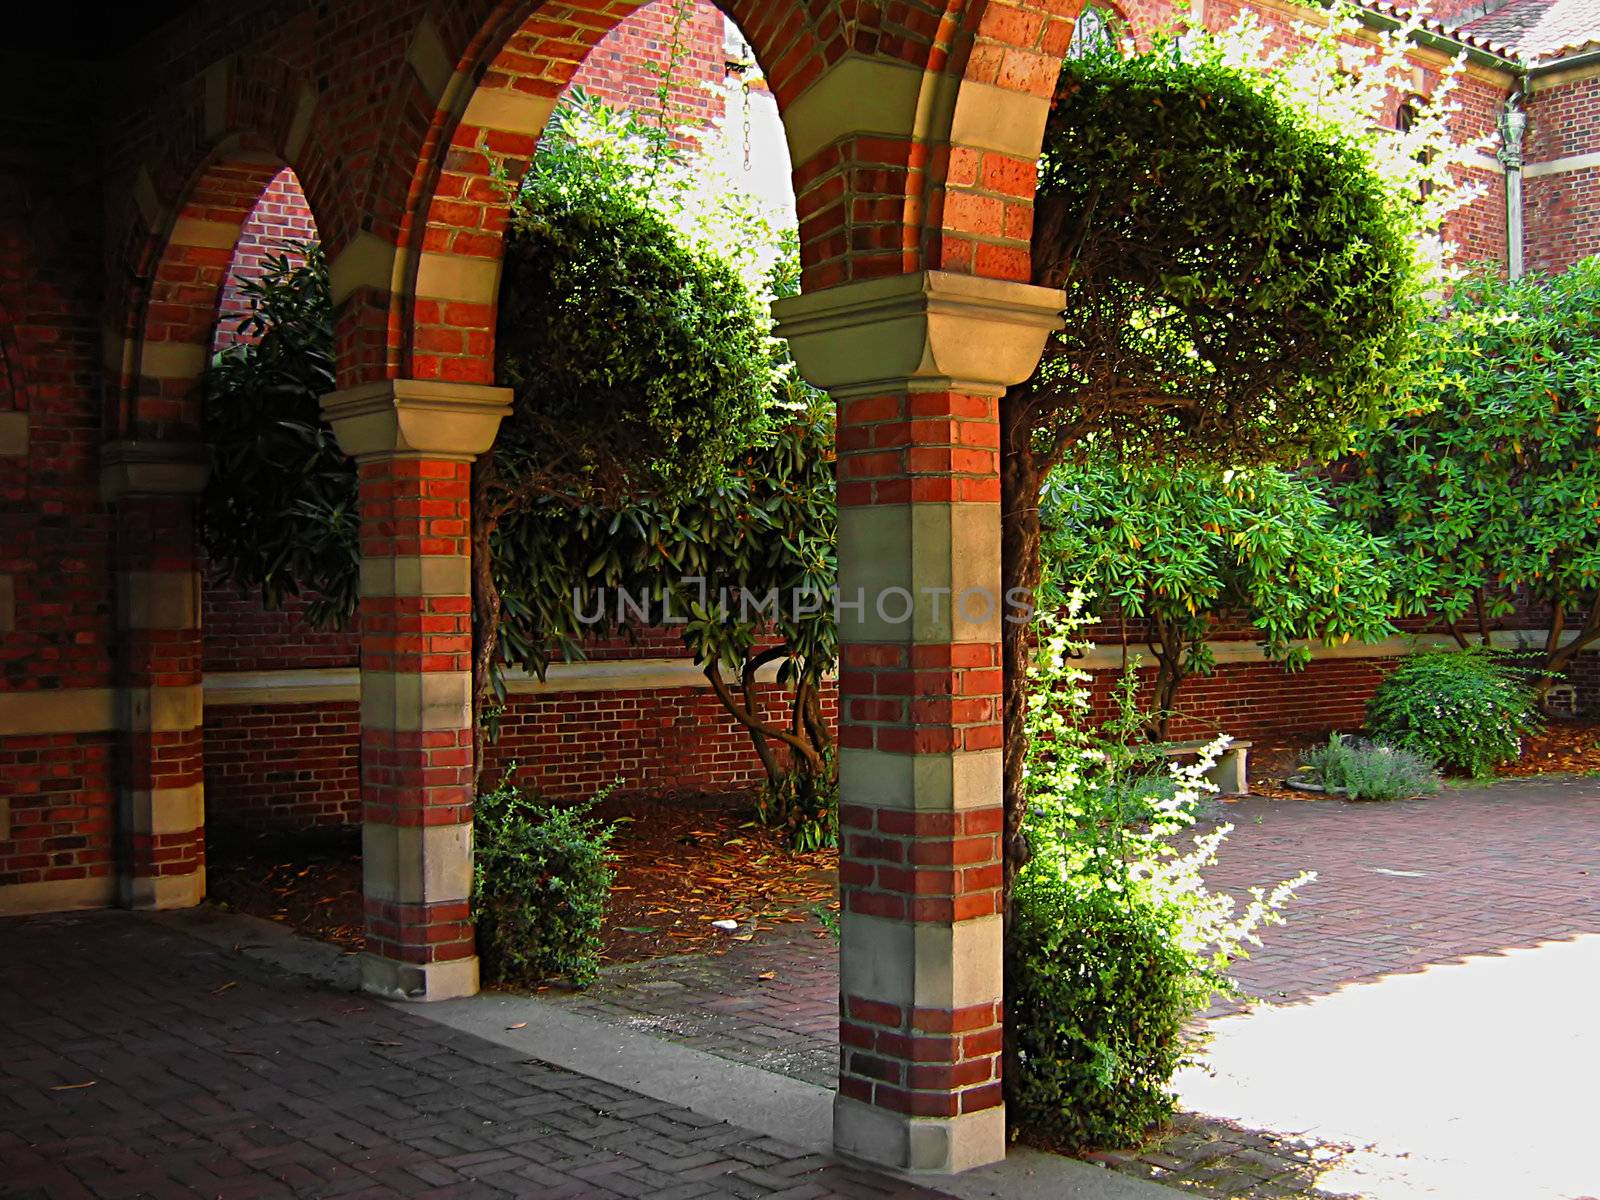 A photograph of an arched walkway of a church detailing its architectural design.